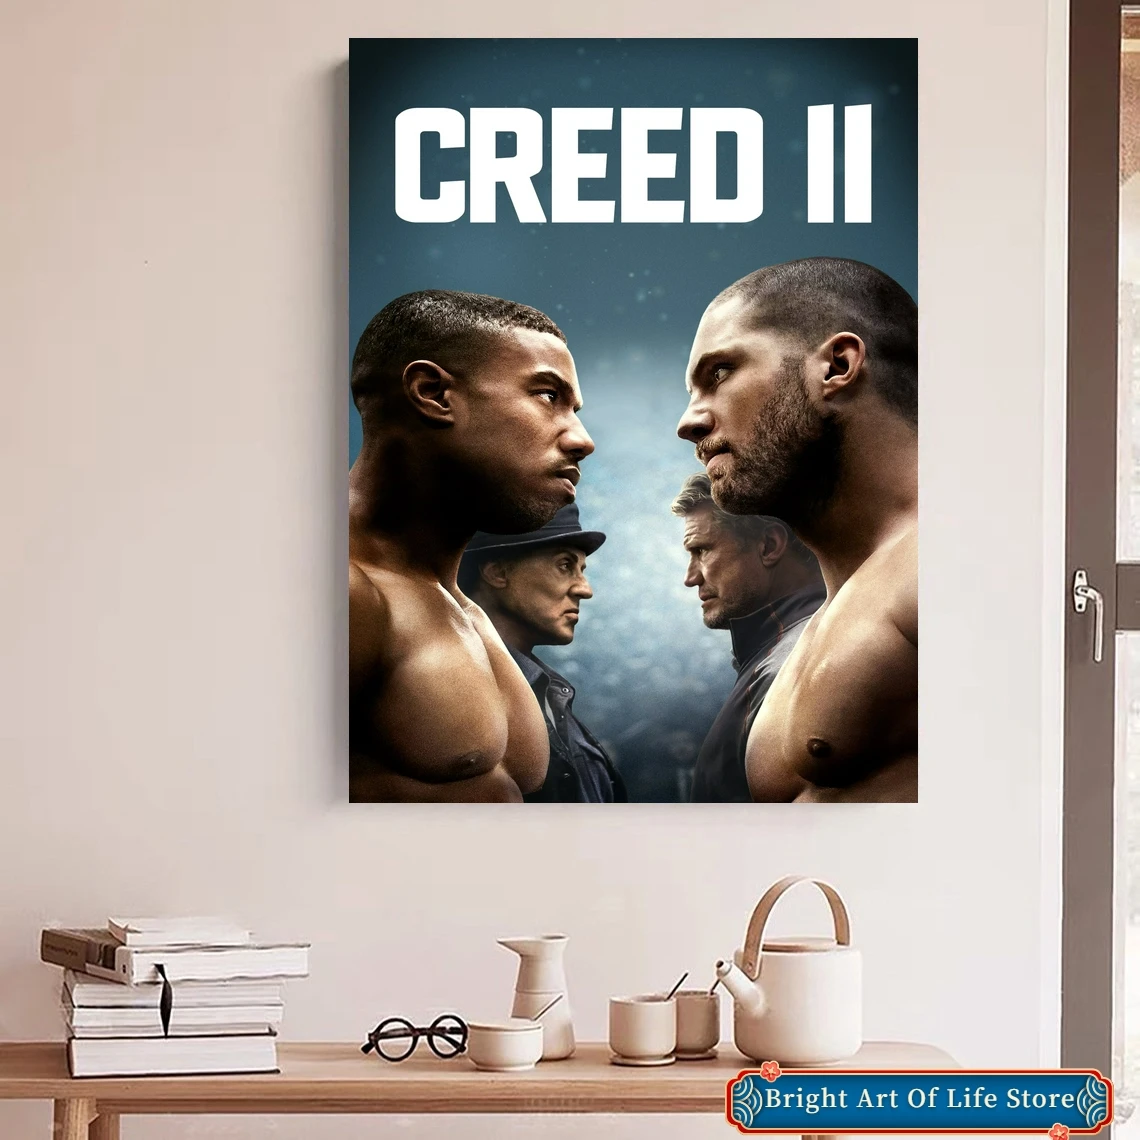 

Creed II Movie Poster Art Cover Star Photo Print Apartment Home Decor Wall Painting (No Frame)